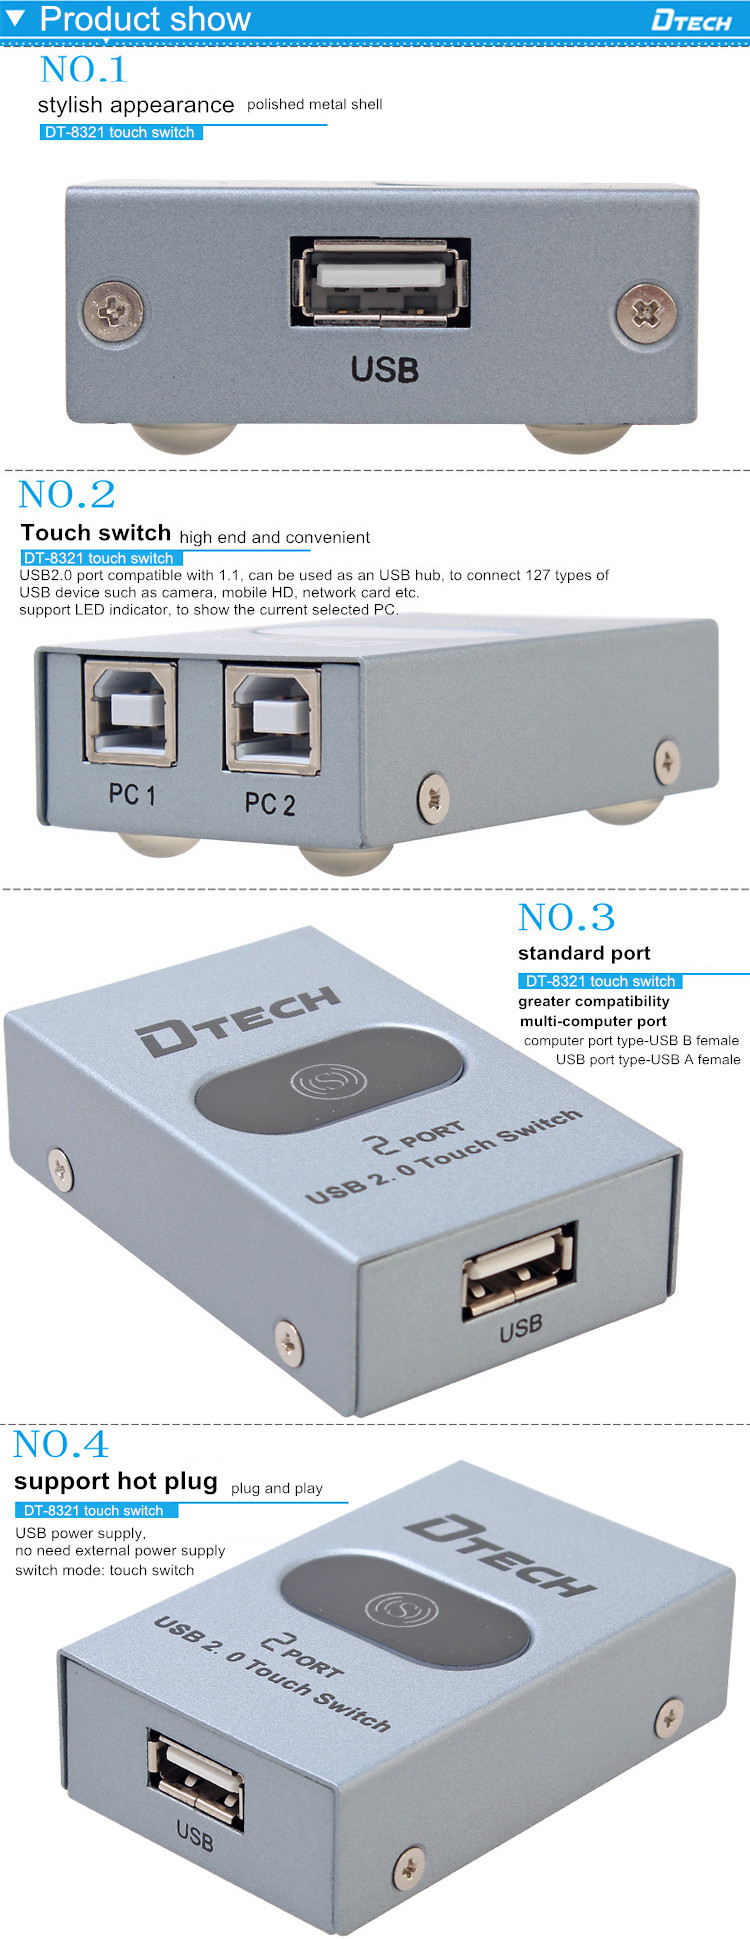 DT-8321 USB manual sharing printing switcher 2 ports